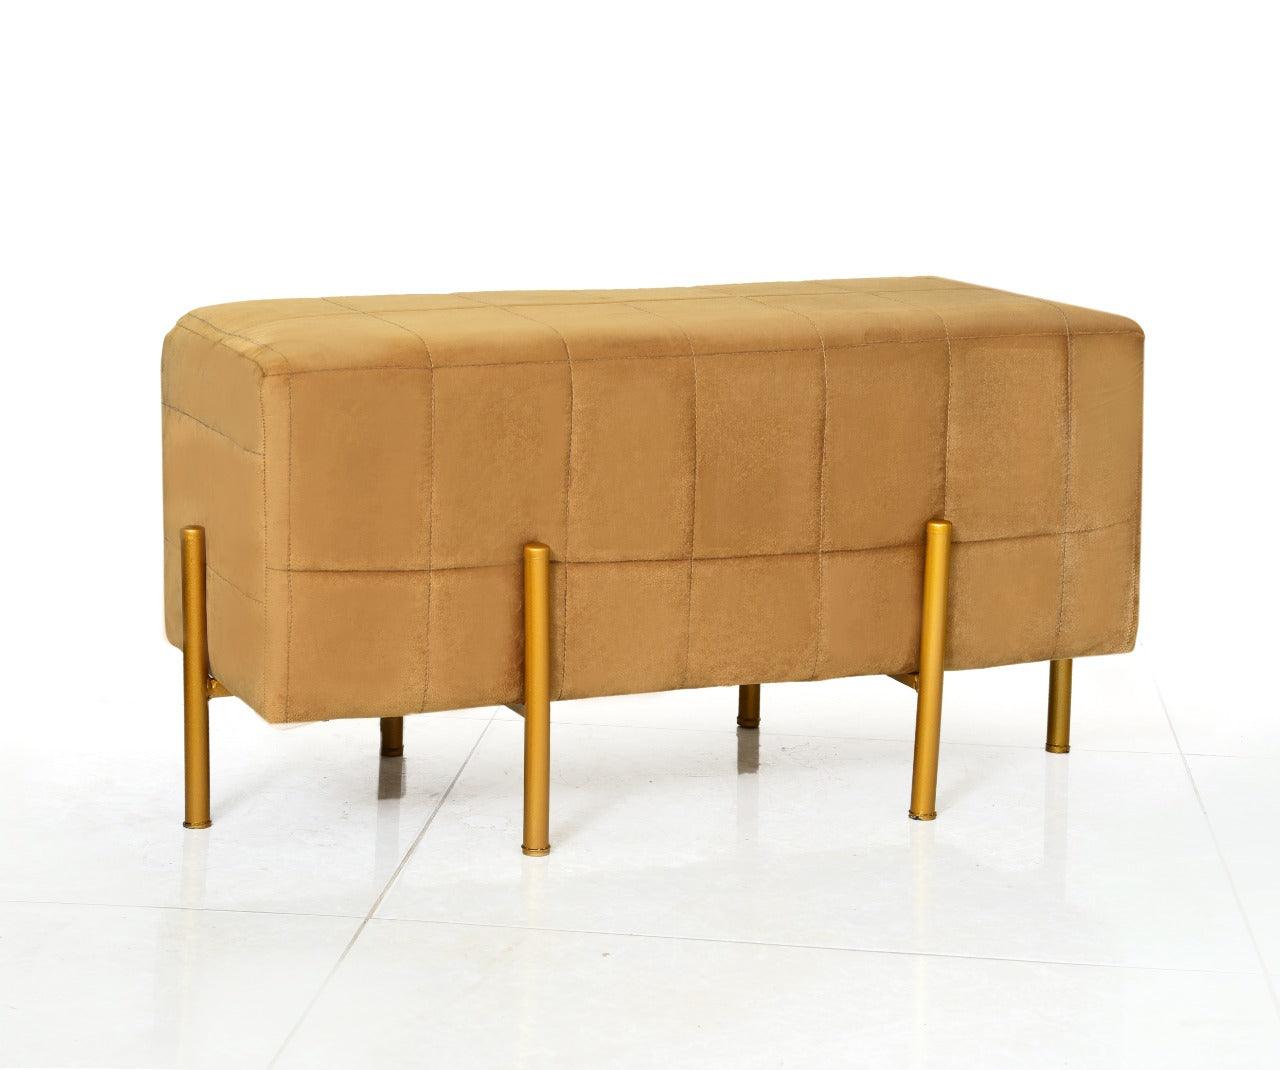 2 Seater Luxury Velvet Wooden Stool With Steel Stand-861 - 92Bedding